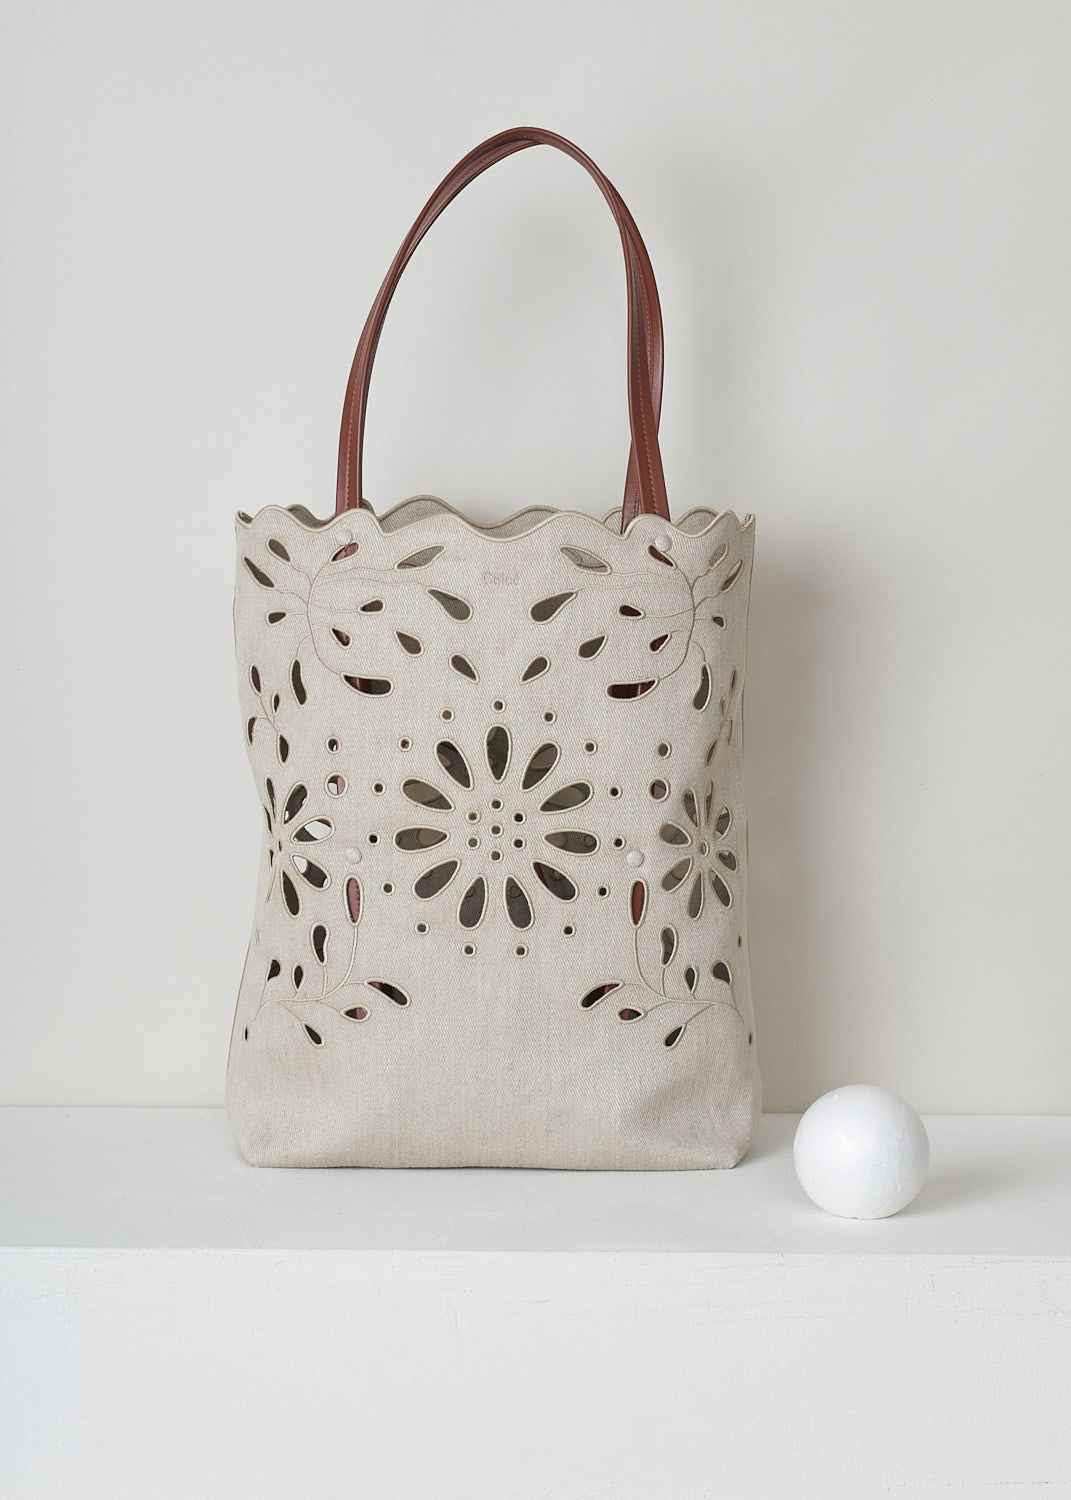 CHLOÃ‰ LARGE KAMILLA NORTH - SOUTH TOTE BAG IN SEPIA BROWN
,CHC22SS492G2327S_KAMILLA_LARGE_NORTH_SO, Beige, Front, This large Kamilla North - South tote bag in sepia brown has two tan leather top handles. The linen has a scalloped top edge and floral broderie anglaise detailing throughout. On the inside, the bag has a removable tan leather pouch with a zipper.  